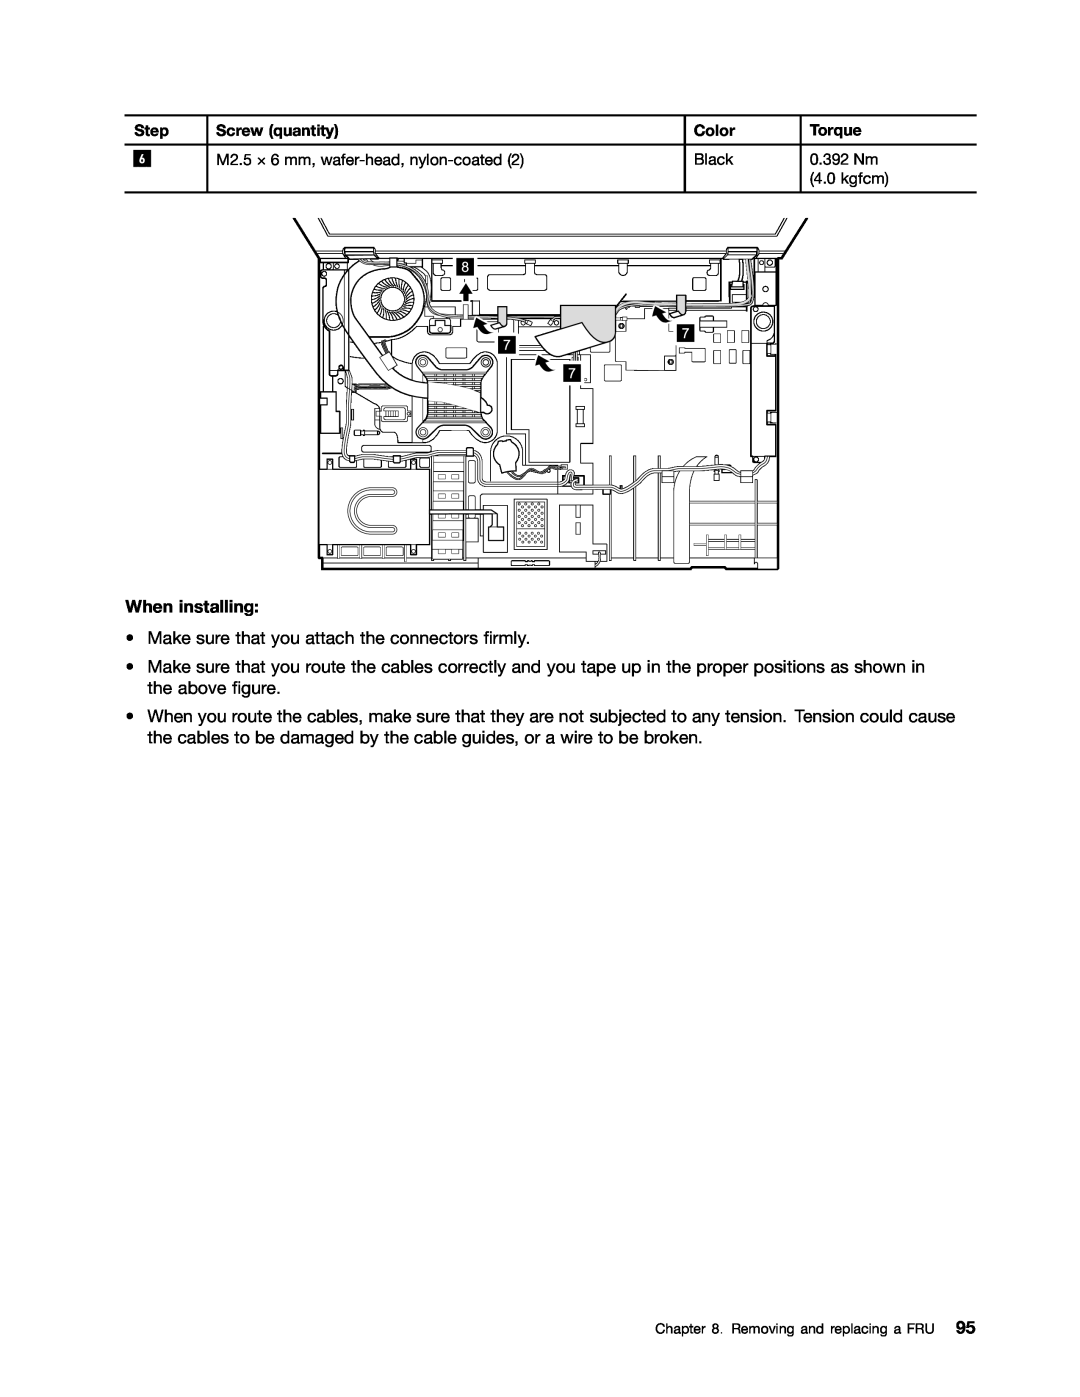 Lenovo T420i manual When installing, Make sure that you attach the connectors firmly 